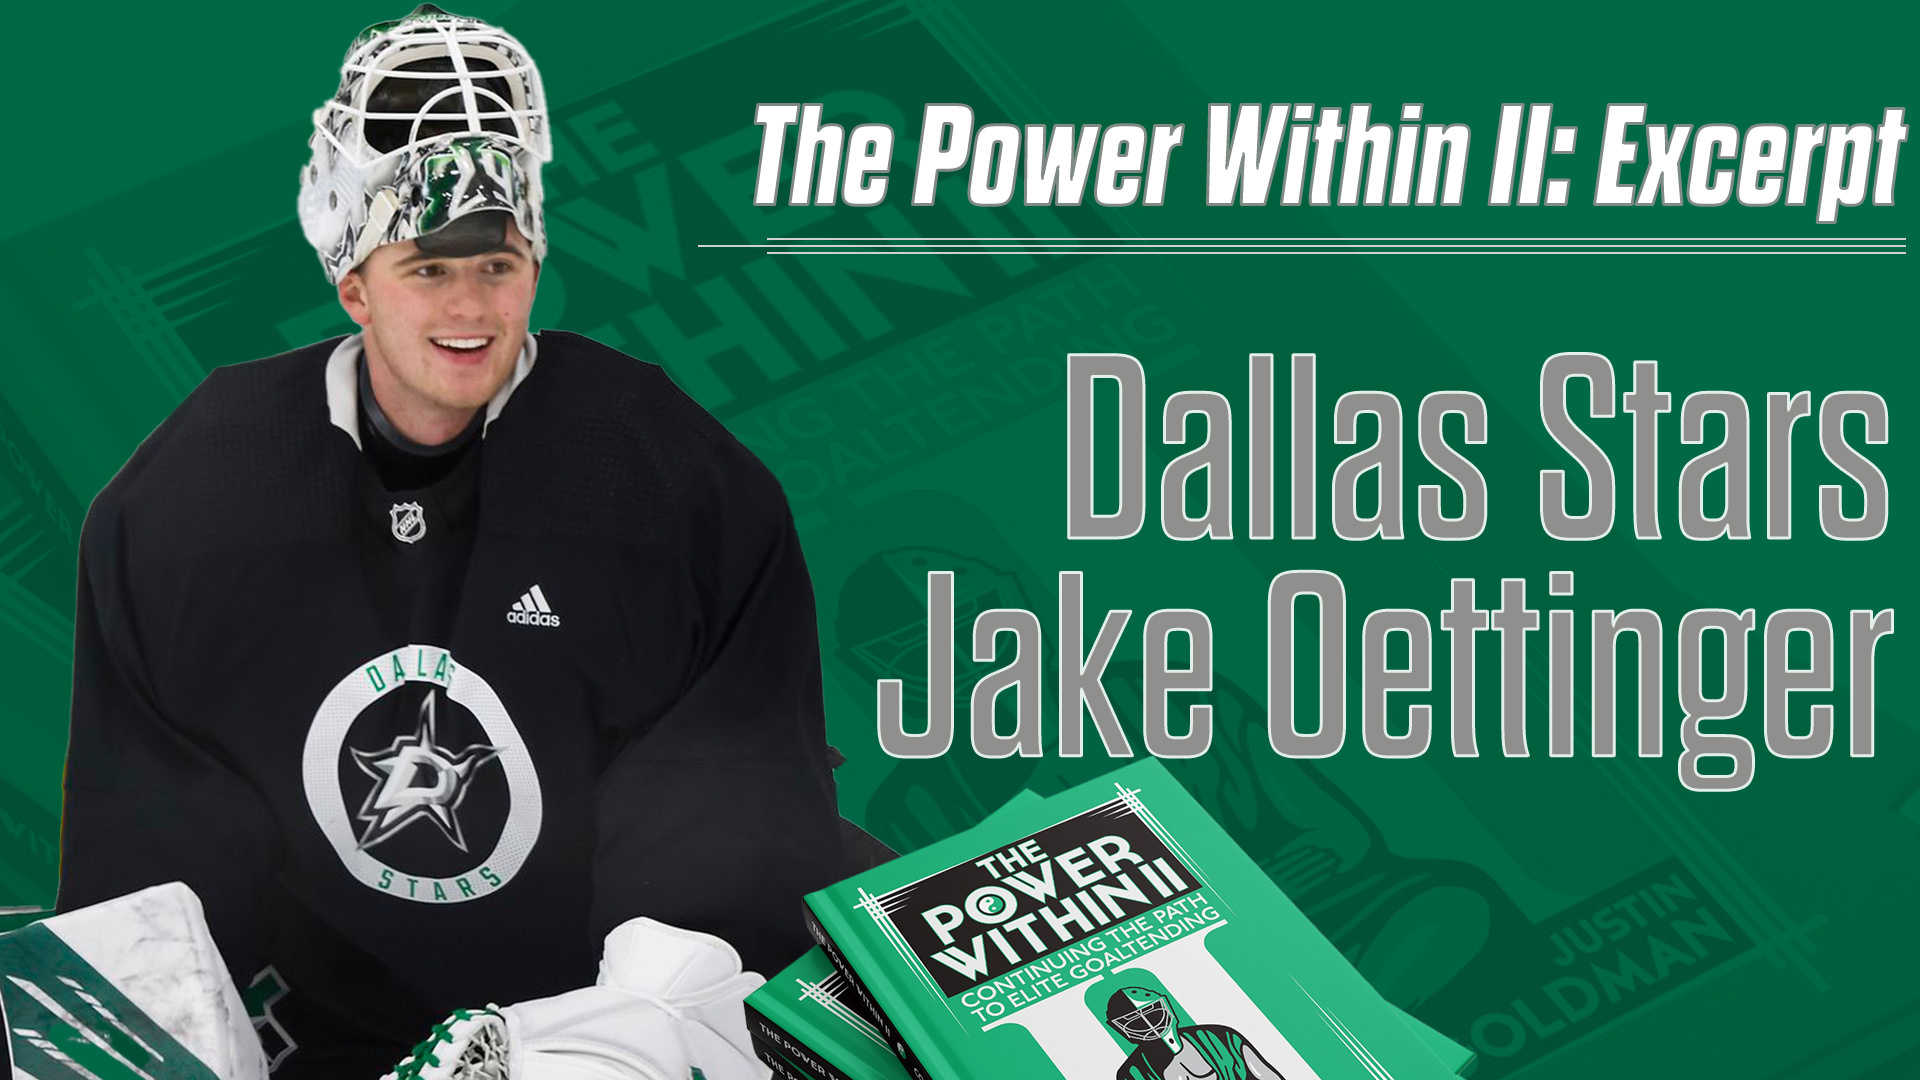 The Power Within II: Excerpt with Dallas Stars Jake Oettinger